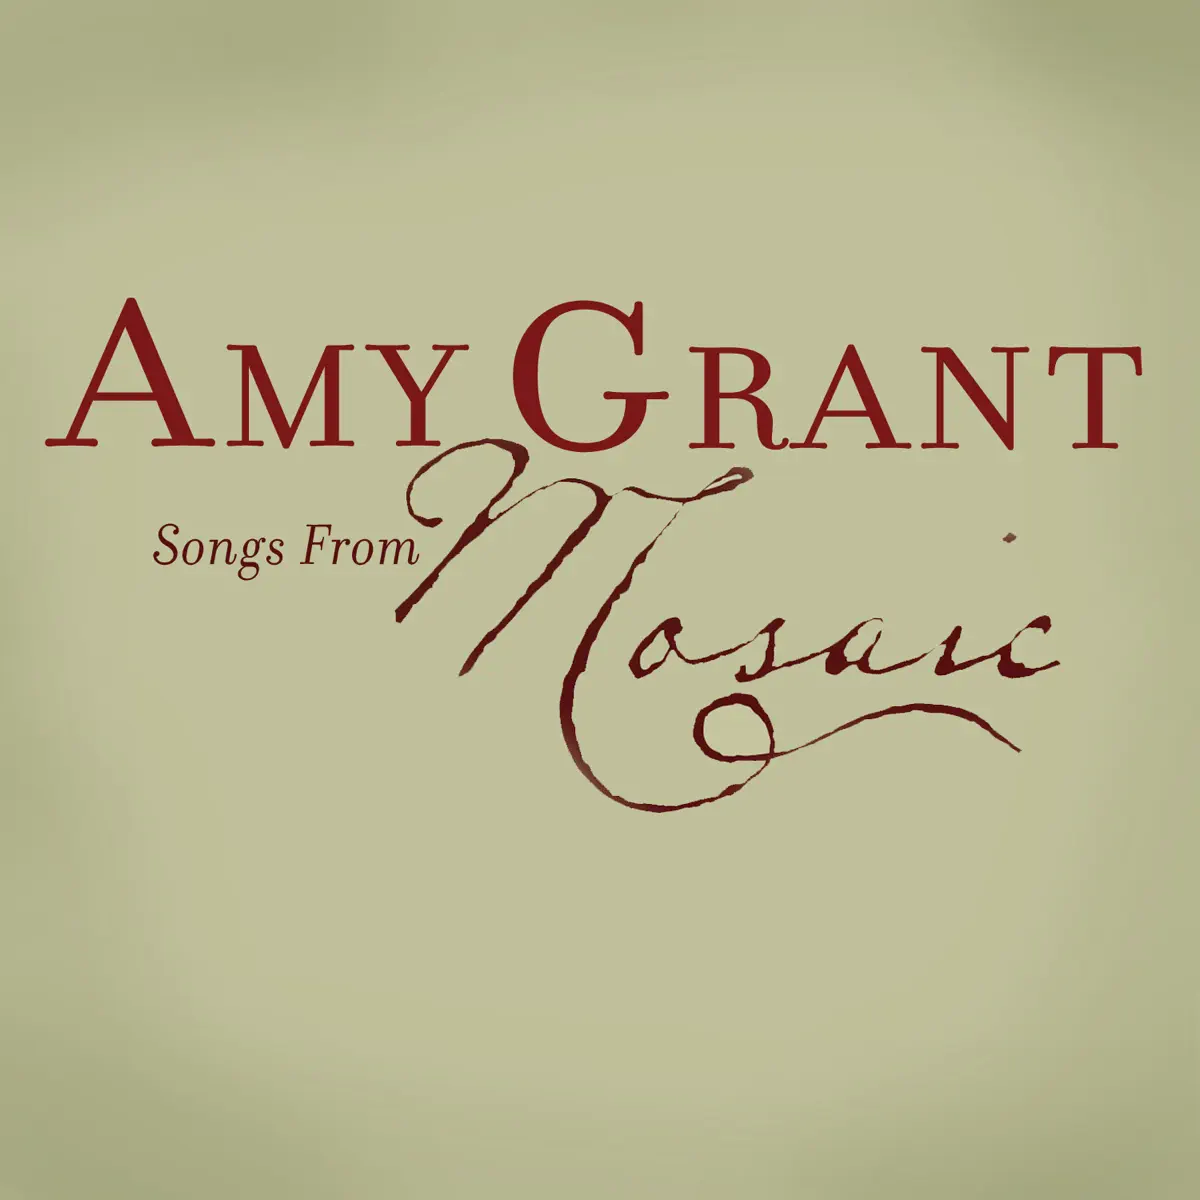 Amy Grant - Songs From Mosaic (2007) [iTunes Plus AAC M4A]-新房子